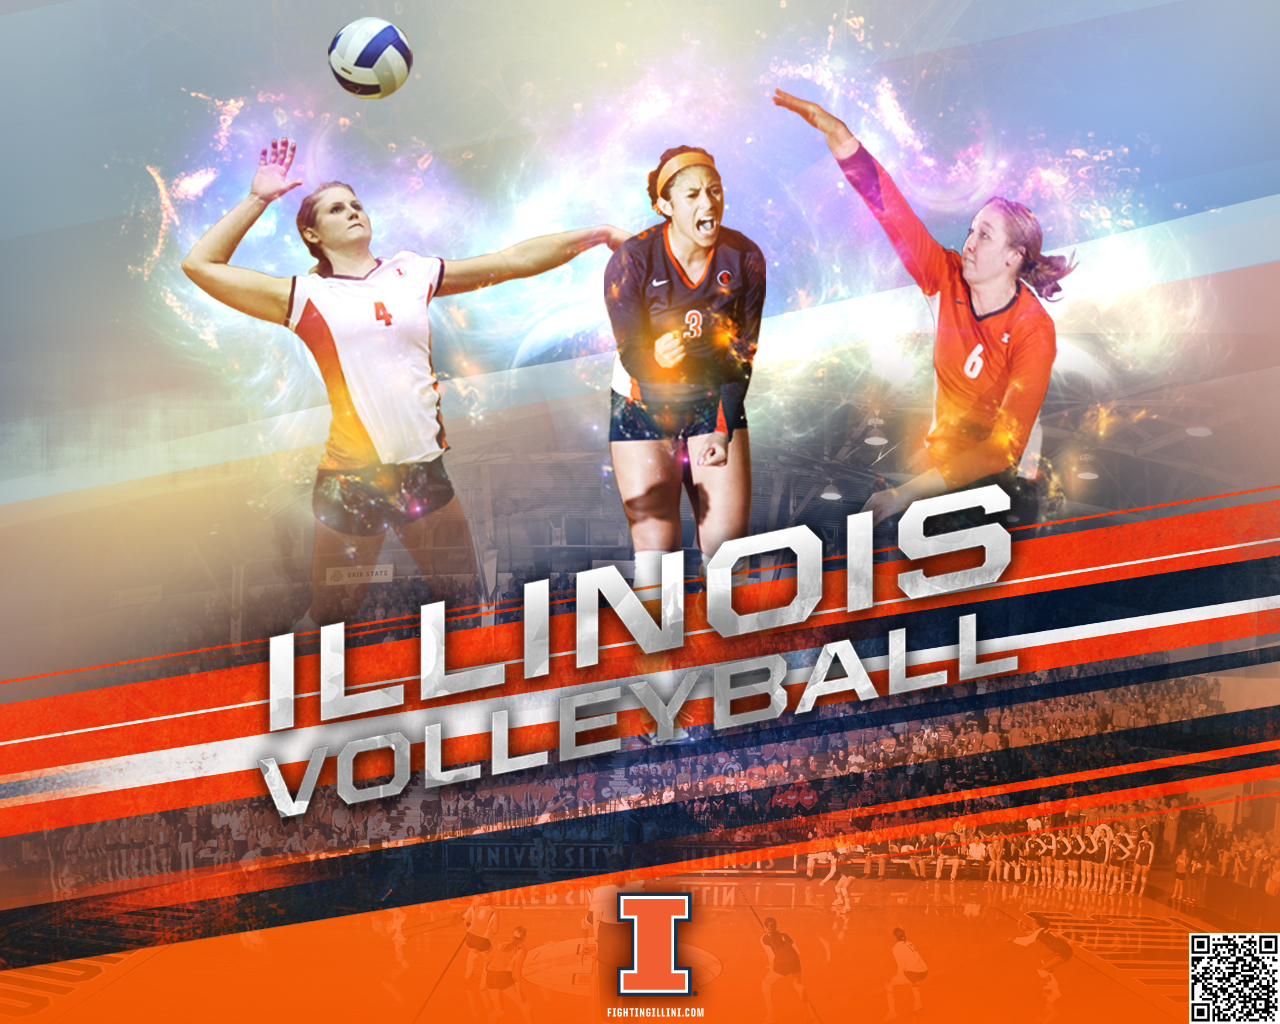 Wallpapers Volleyball 1280x1024 | #1080324 #volleyball